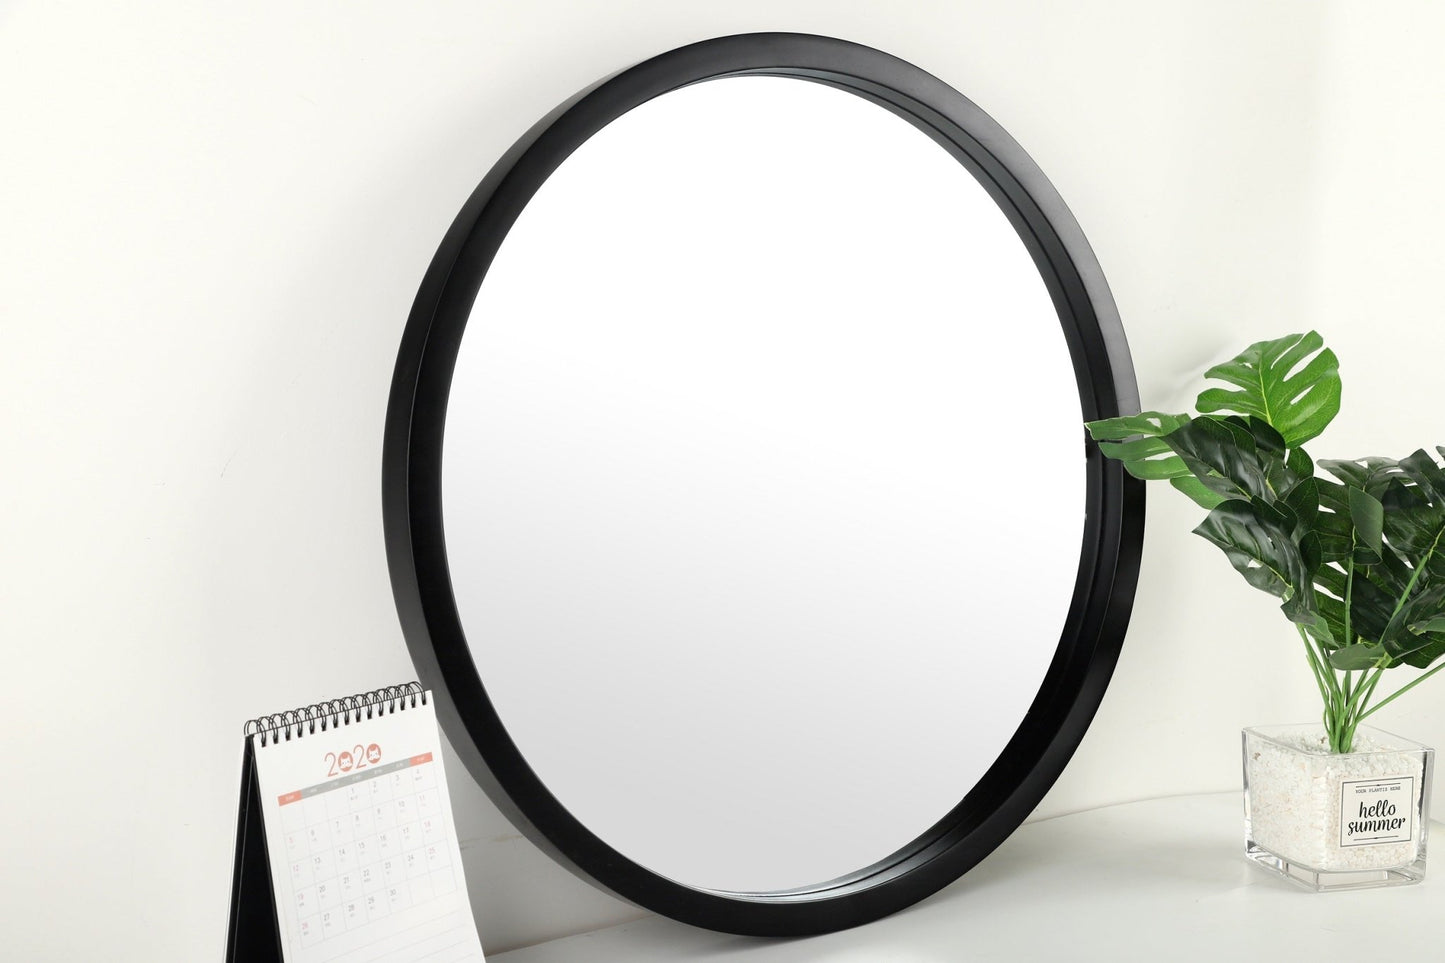 JIYUERLTD Round Mirrors 24inch Wall Mirrors Decorative Wood Frame Morden Mirrors for Bathroom Entryways Living Rooms and More. - JIYUERLTDJIYUERLTD Round Mirrors 24inch Wall Mirrors Decorative Wood Frame Morden Mirrors for Bathroom Entryways Living Rooms and More.